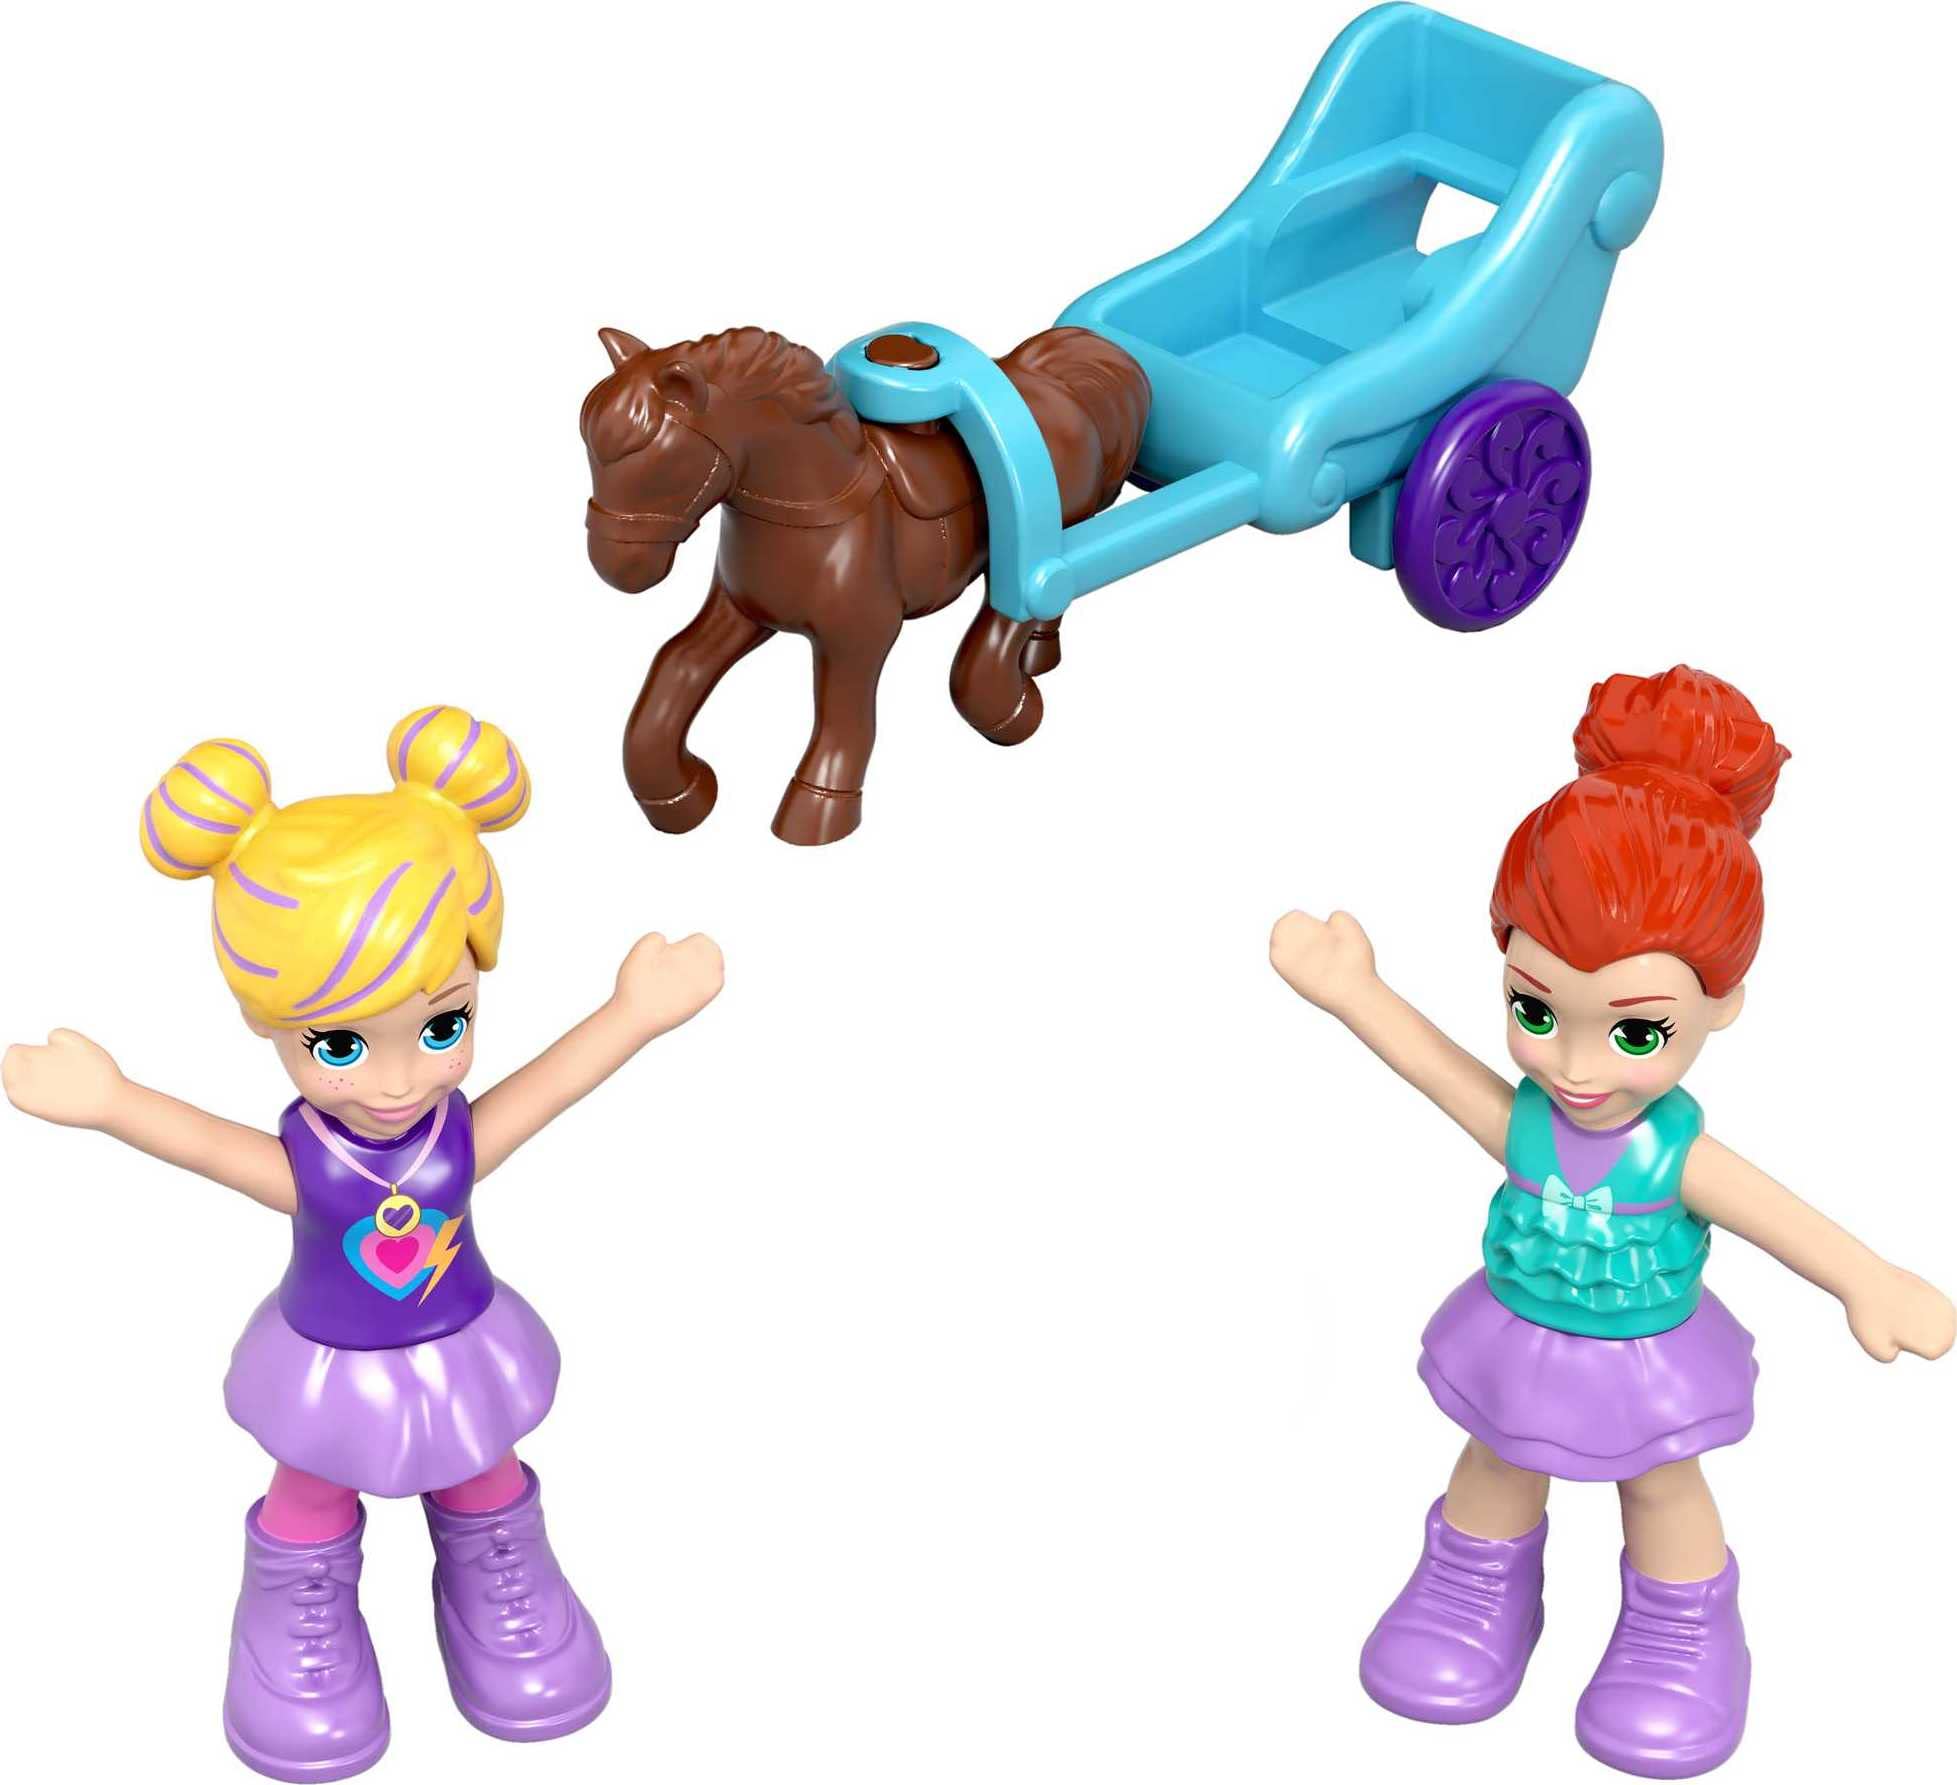 Polly Pocket Playset with 2 Micro Dolls & Surprise Accessories, Music Toy with Ballet Theme, Pocket World Tiny Twirlin' Music Box